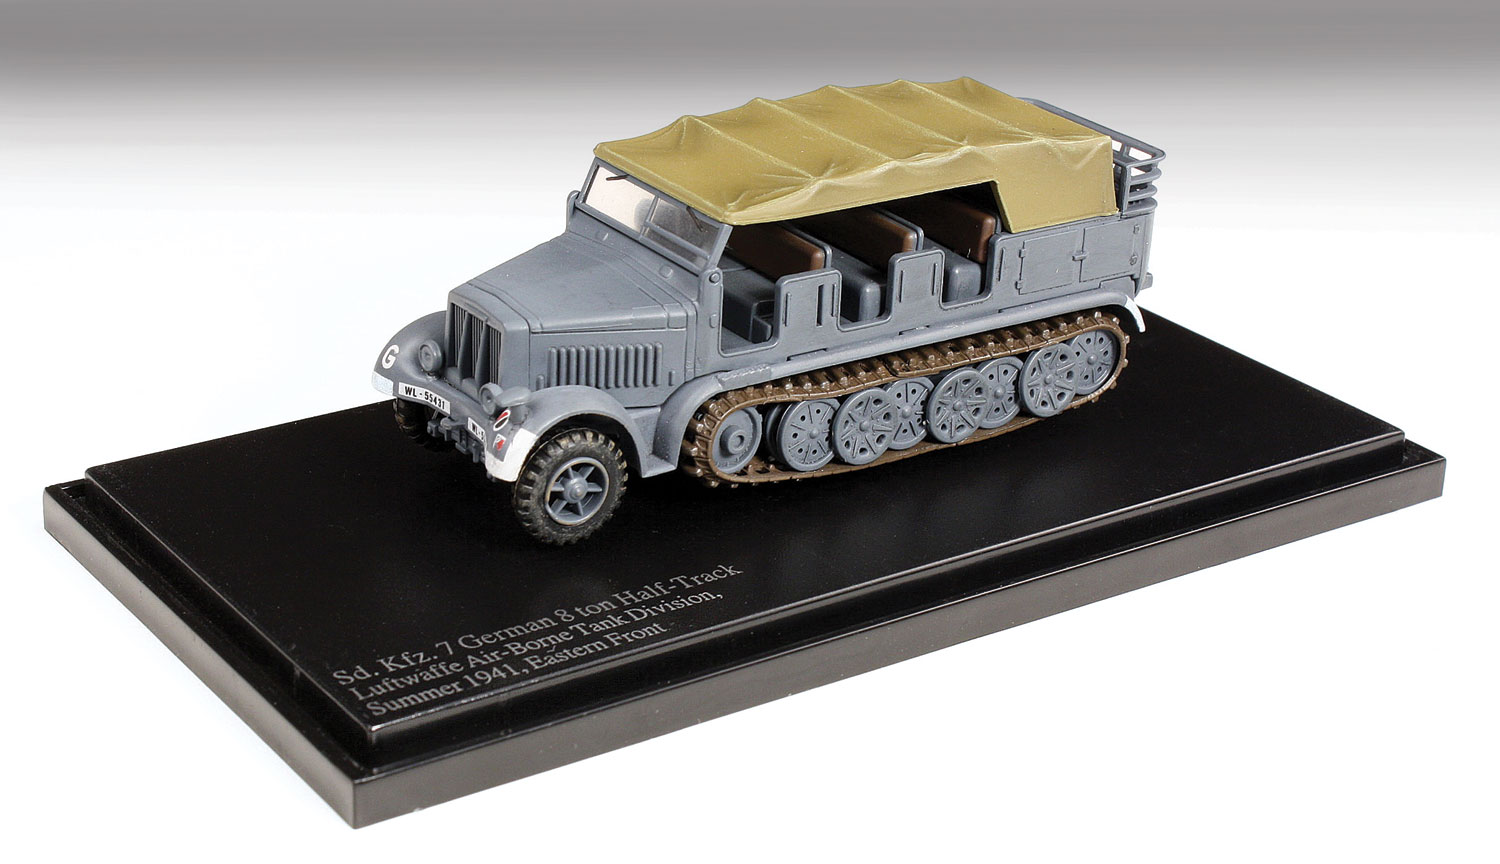 HG5001 Sd.Kfz.7 8Ton Half Track luftwaffe Airborne 172 Scale - Click Image to Close